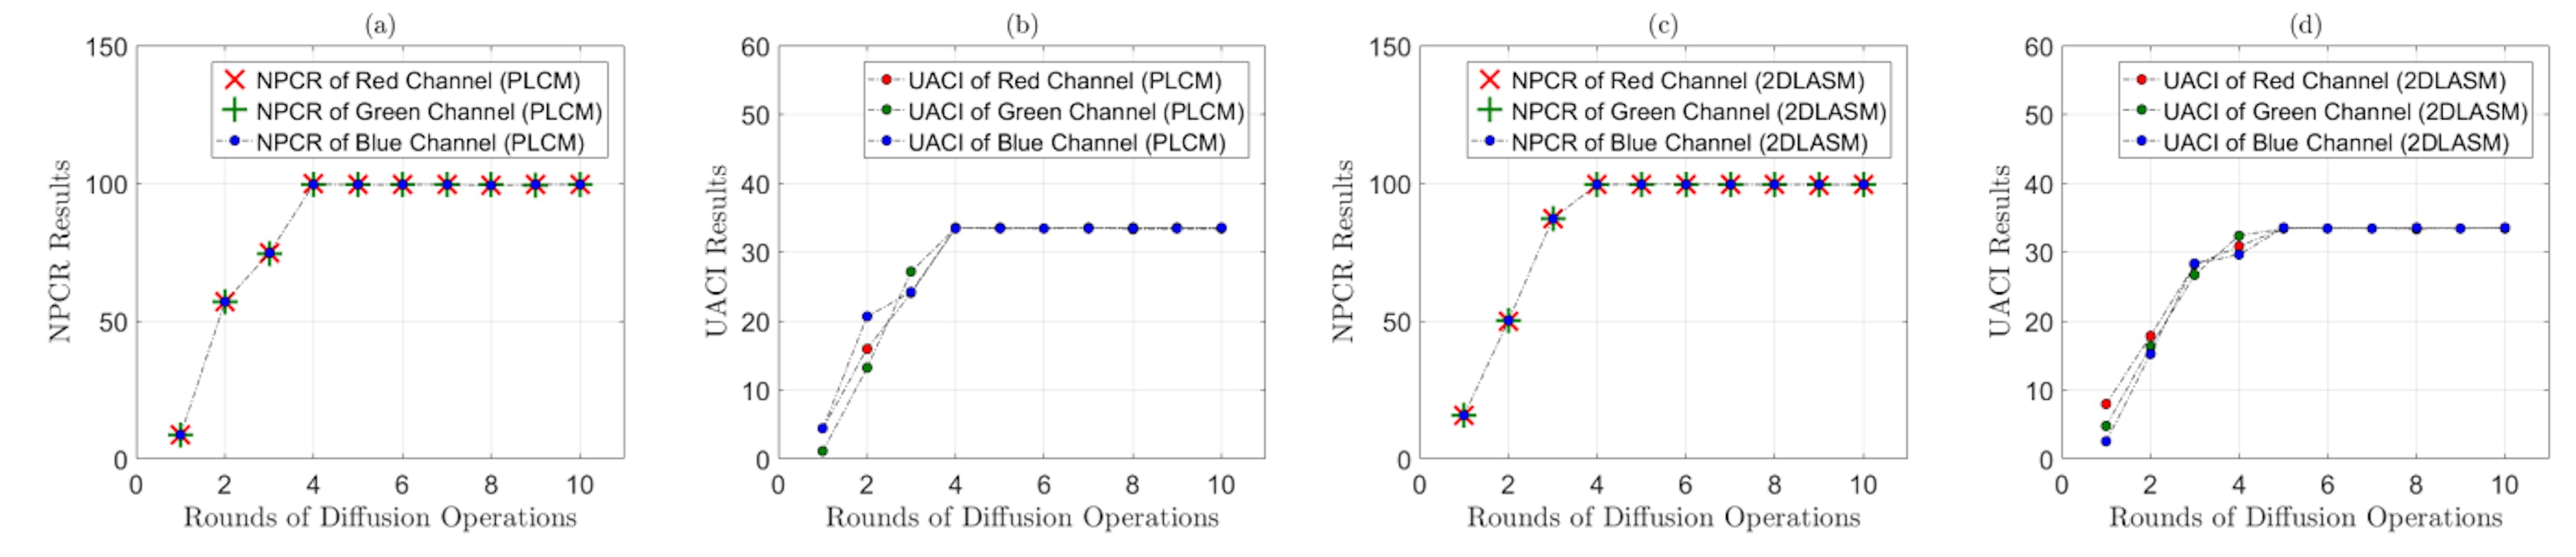 Figure 9: Relationship between the rounds of diffusion operations and NPCR, UACI results, (a) NPCR results of the cryptosystem based on PLCM, (b) UACI results of the cyrptosystem based on PLCM, (c) NPCR results of the cryptosystem based on 2DLASM, (d) UACI results of the cyrptosystem based on 2DLASM.